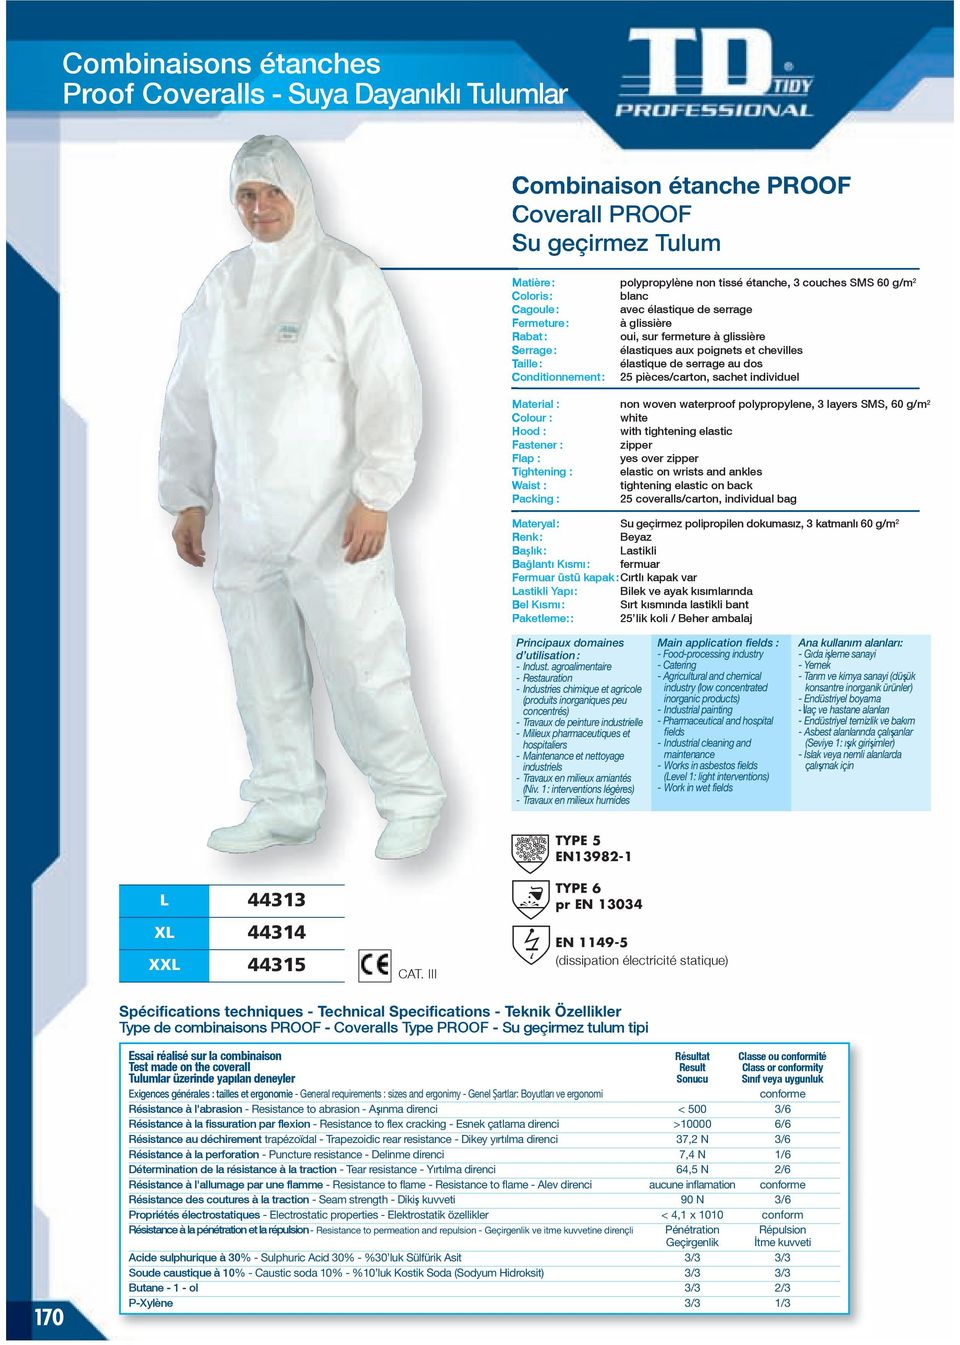 pièces/carton, sachet individuel non woven waterproof polypropylene, 3 layers SMS, 60 g/m 2 Hood : with tightening elastic Fastener : zipper Flap : yes over zipper Tightening : elastic on wrists and